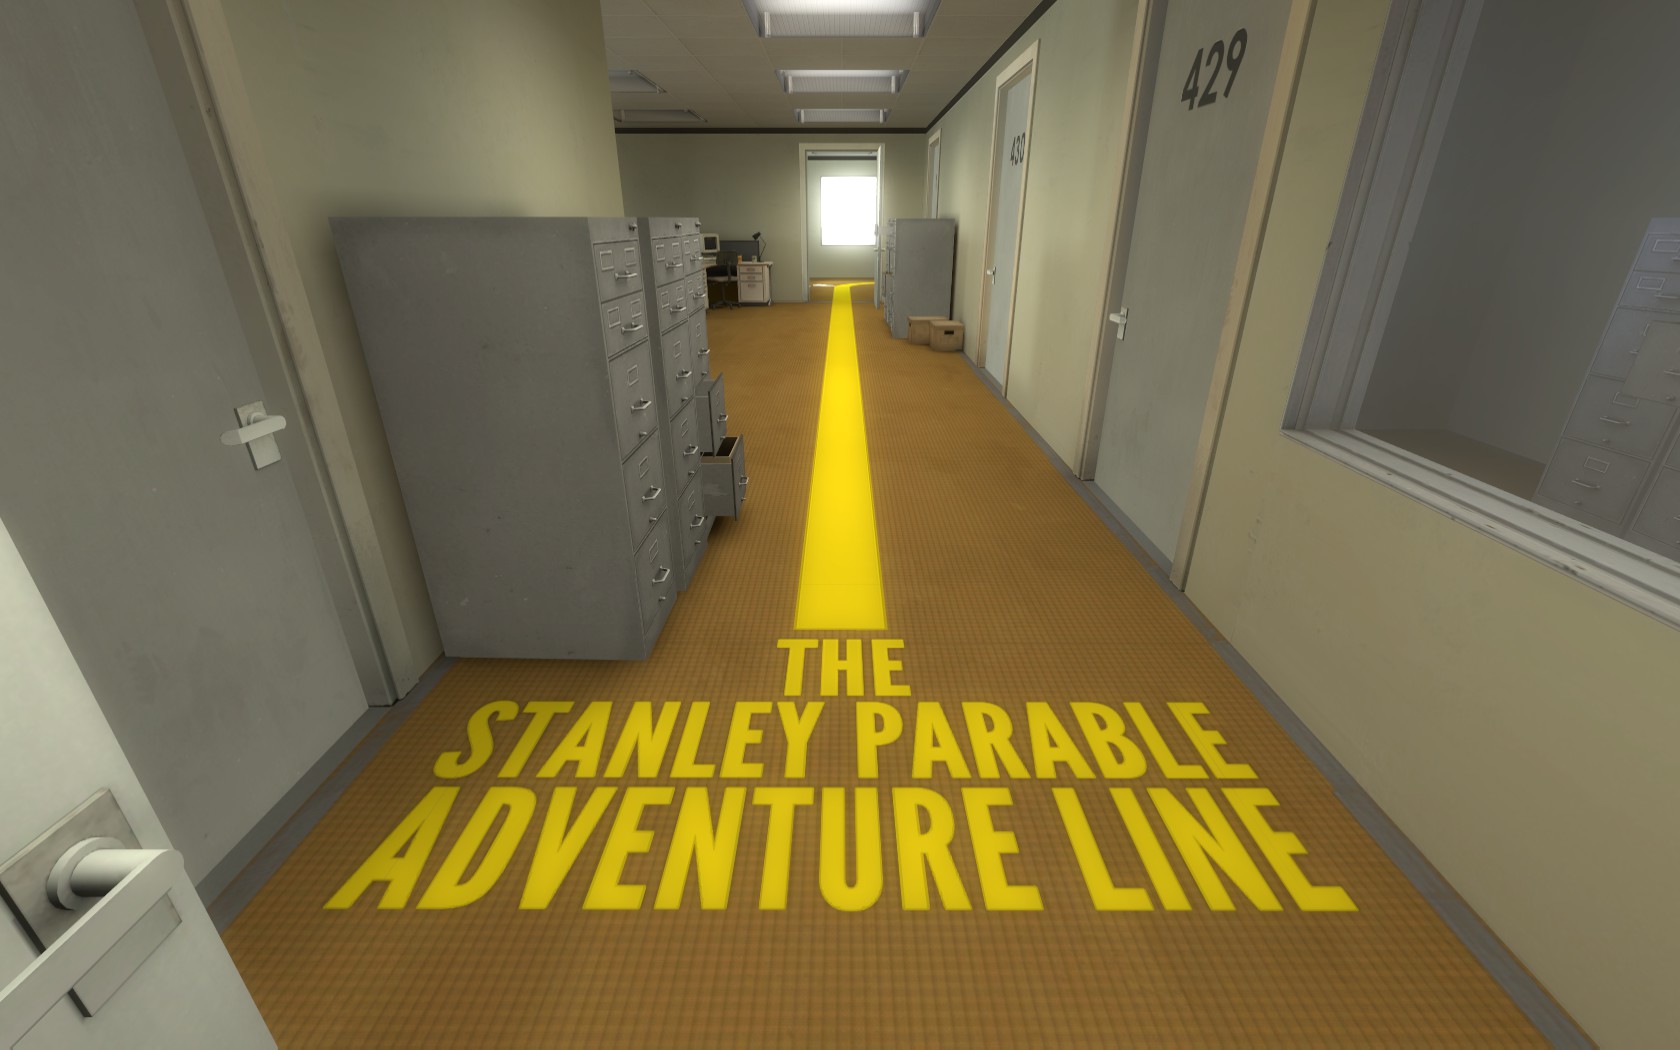 The-Stanley-Parable-Review-Screenshot-Wallpaper-The-Adventure-Line.jpg